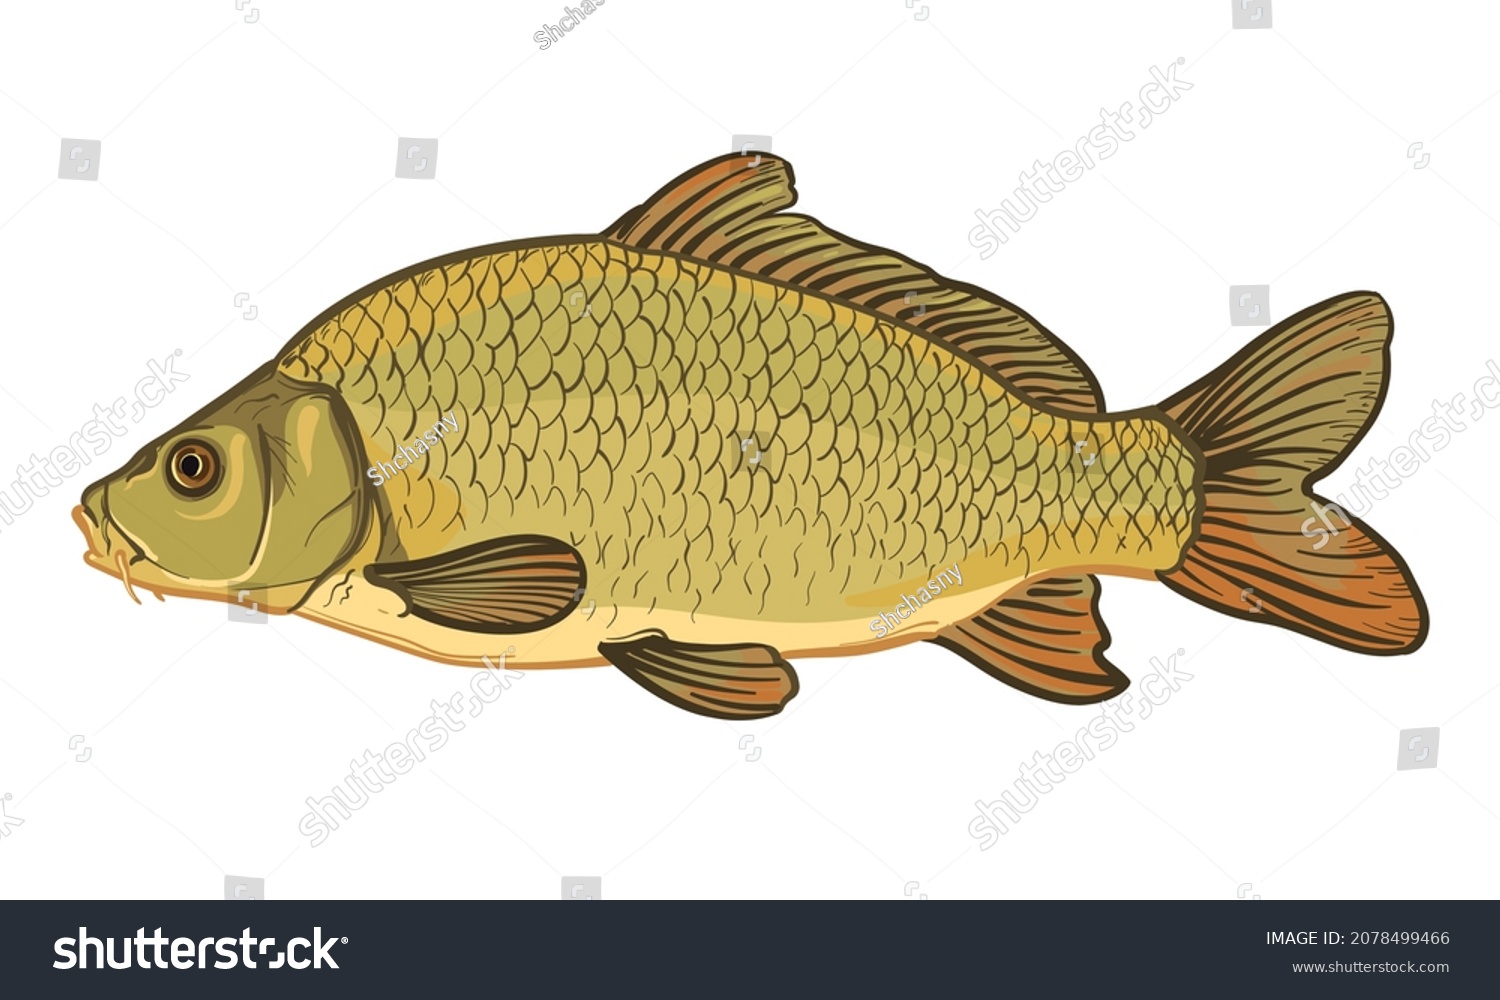 Carp fish, isolated on a white background. Color vector illustration of a fish. #2078499466